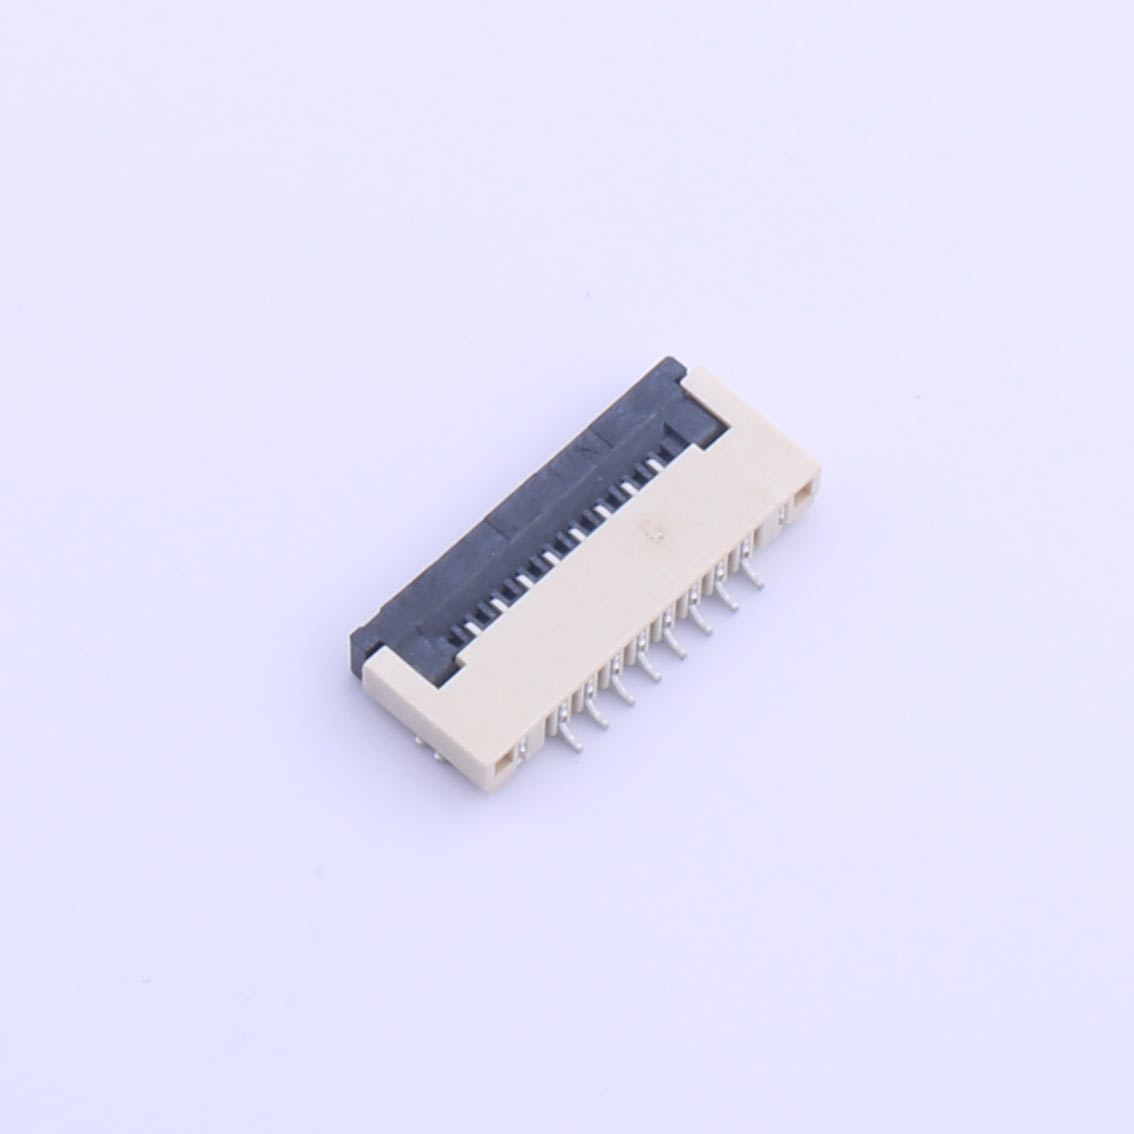 Kinghelm 1mm Pitch FPC FFC Connector 8P Height 2mm Front Flip Bottom Contact SMT FPC Connector--KH-FG1.0-H2.0-8PIN